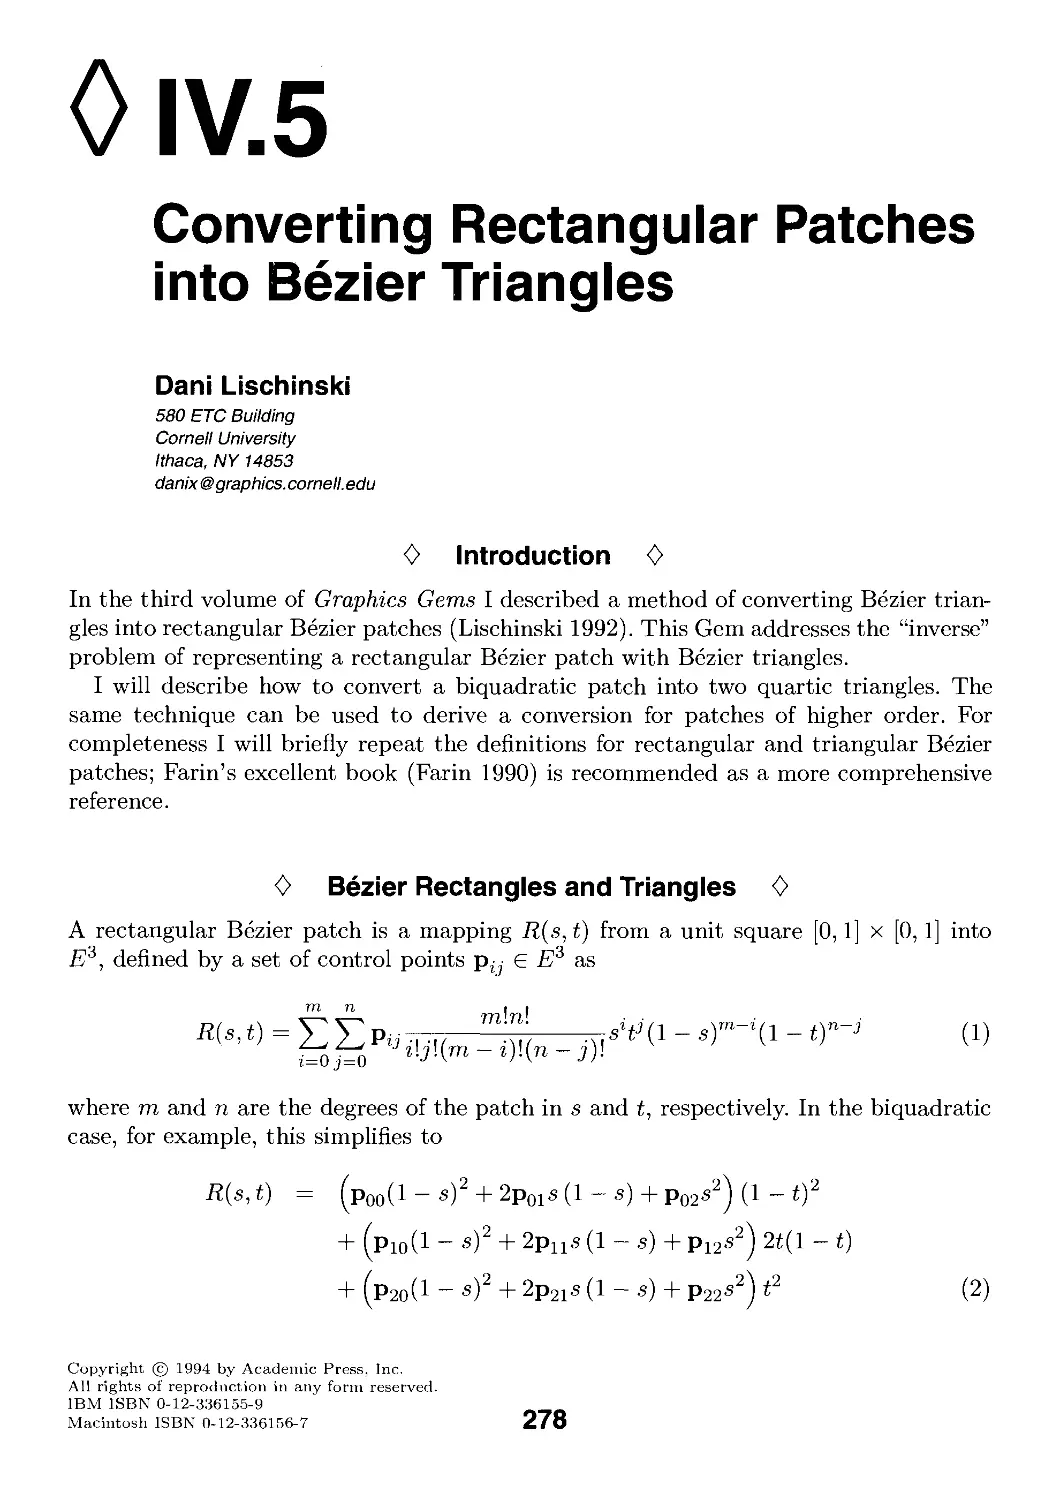 IV.5. Converting Rectangular Patches into Bezier Triangles by Dani Lischinski